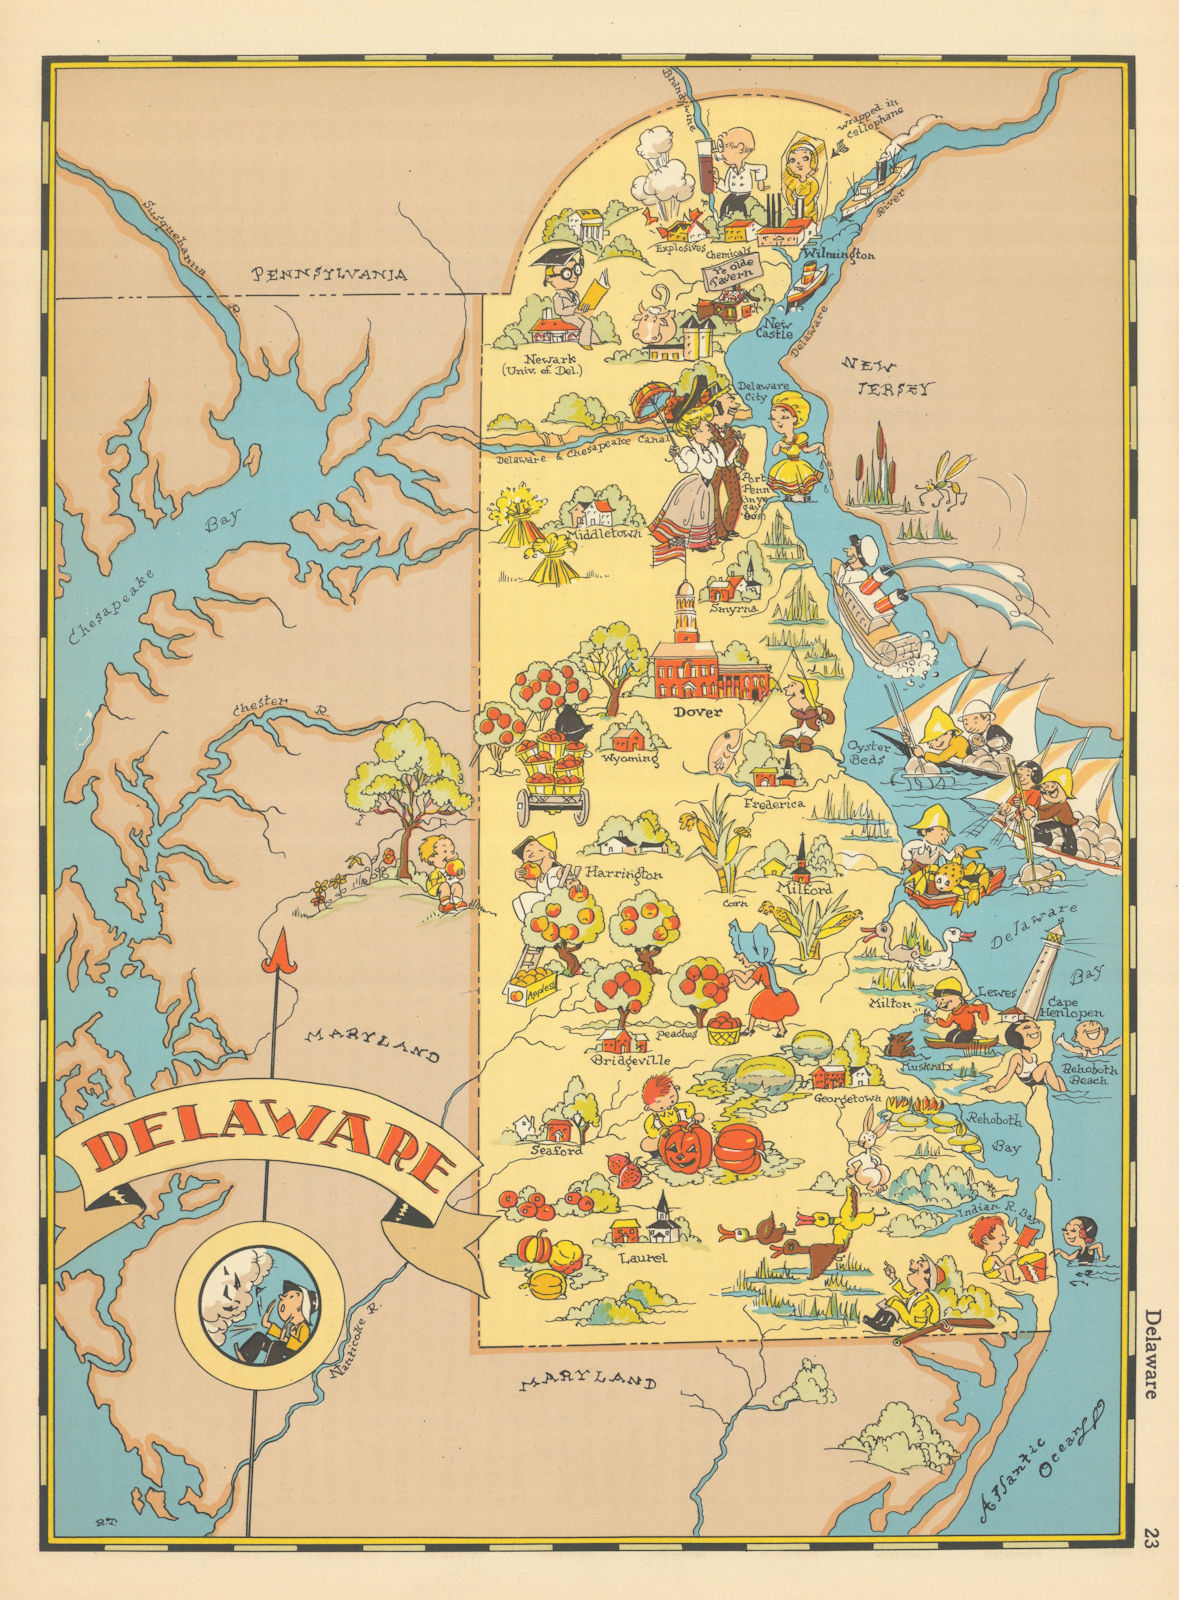 Associate Product Delaware. Pictorial state map by Ruth Taylor White 1935 old vintage chart